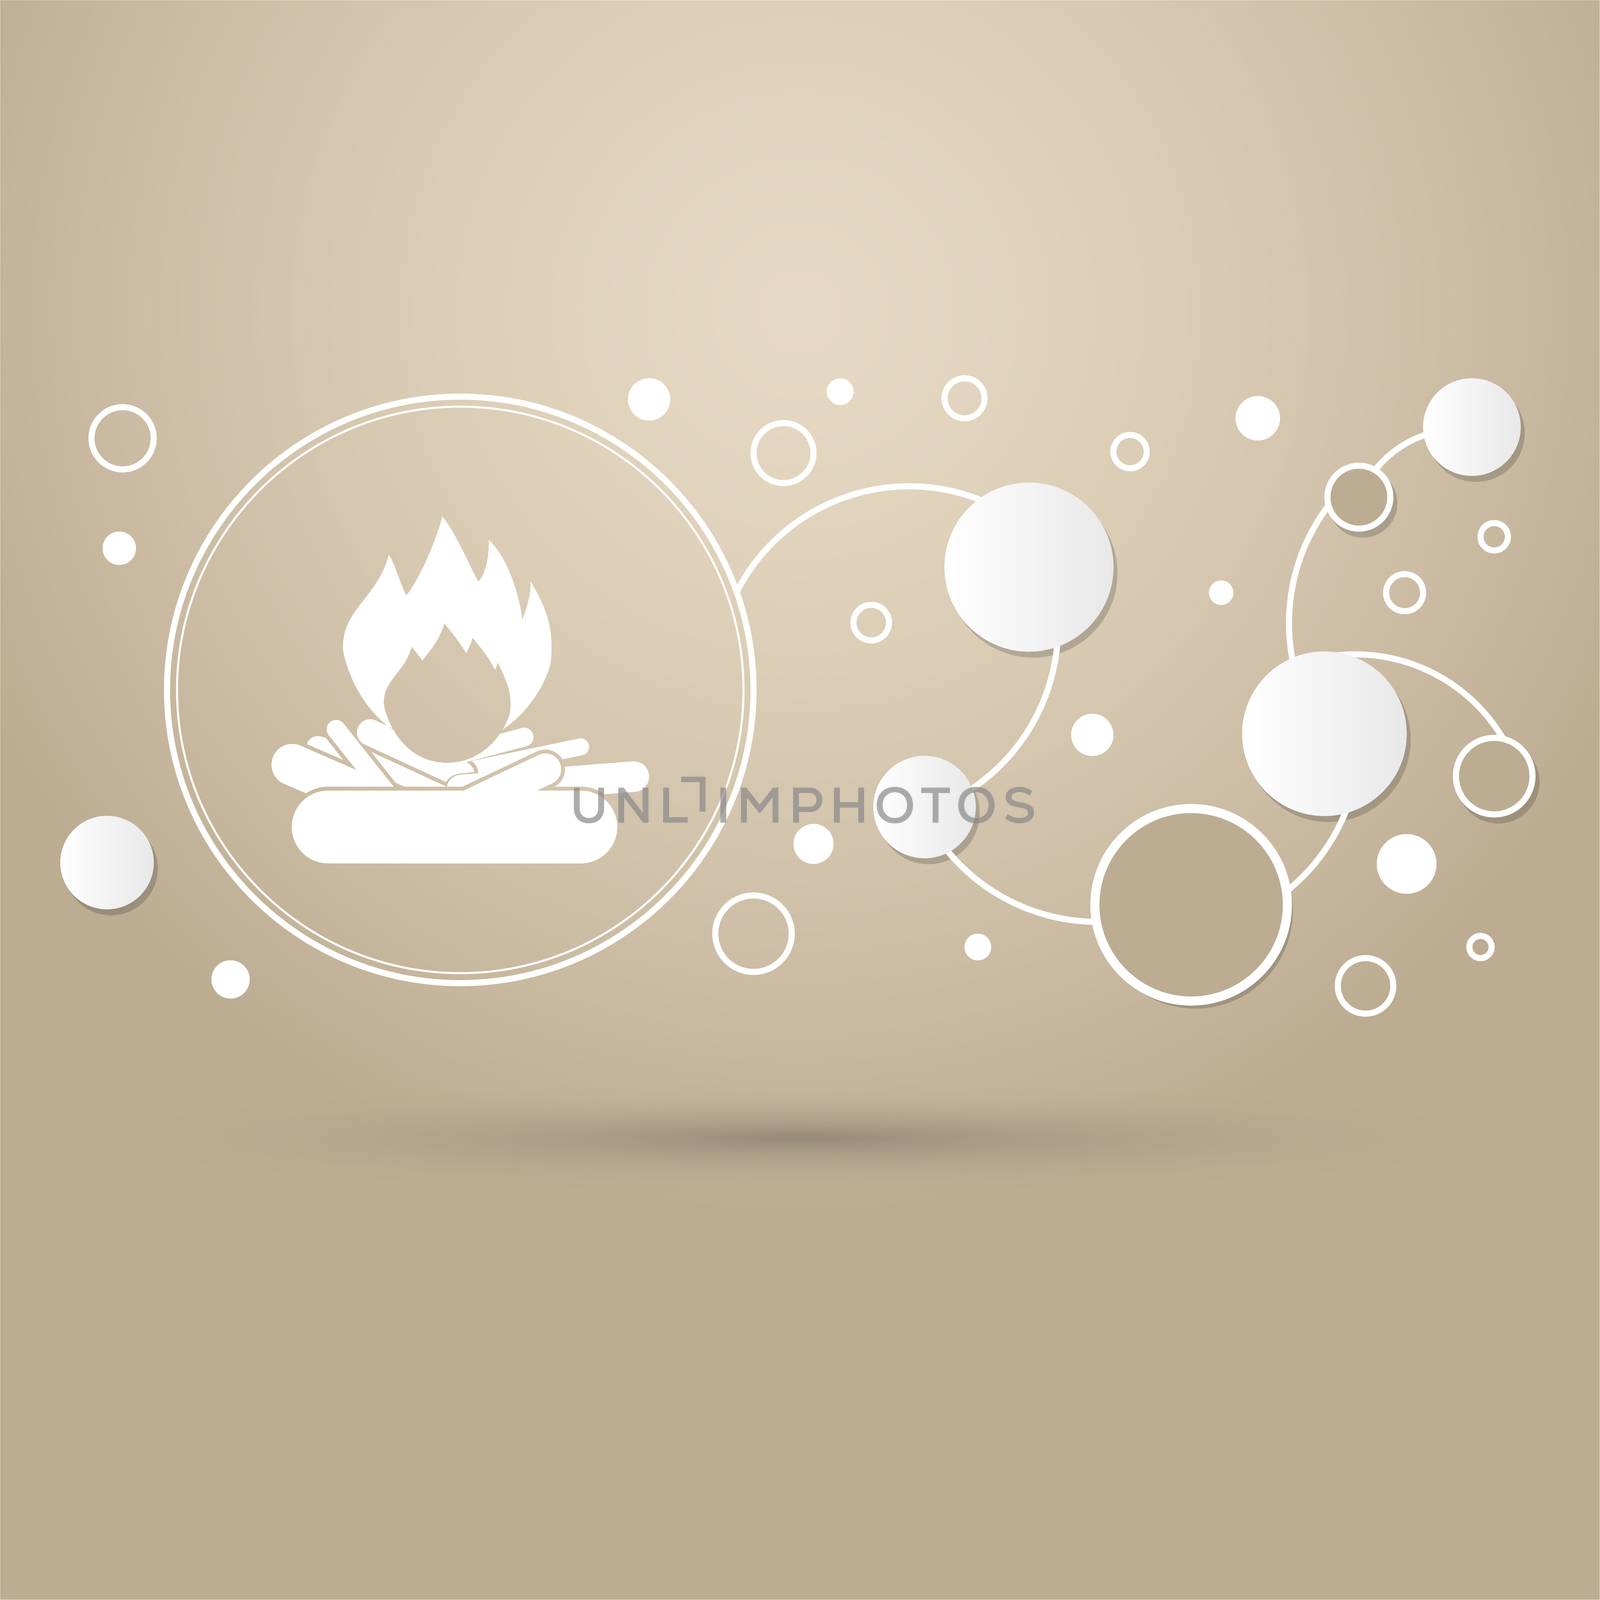 Fire Icon on a brown background with elegant style and modern design infographic. illustration